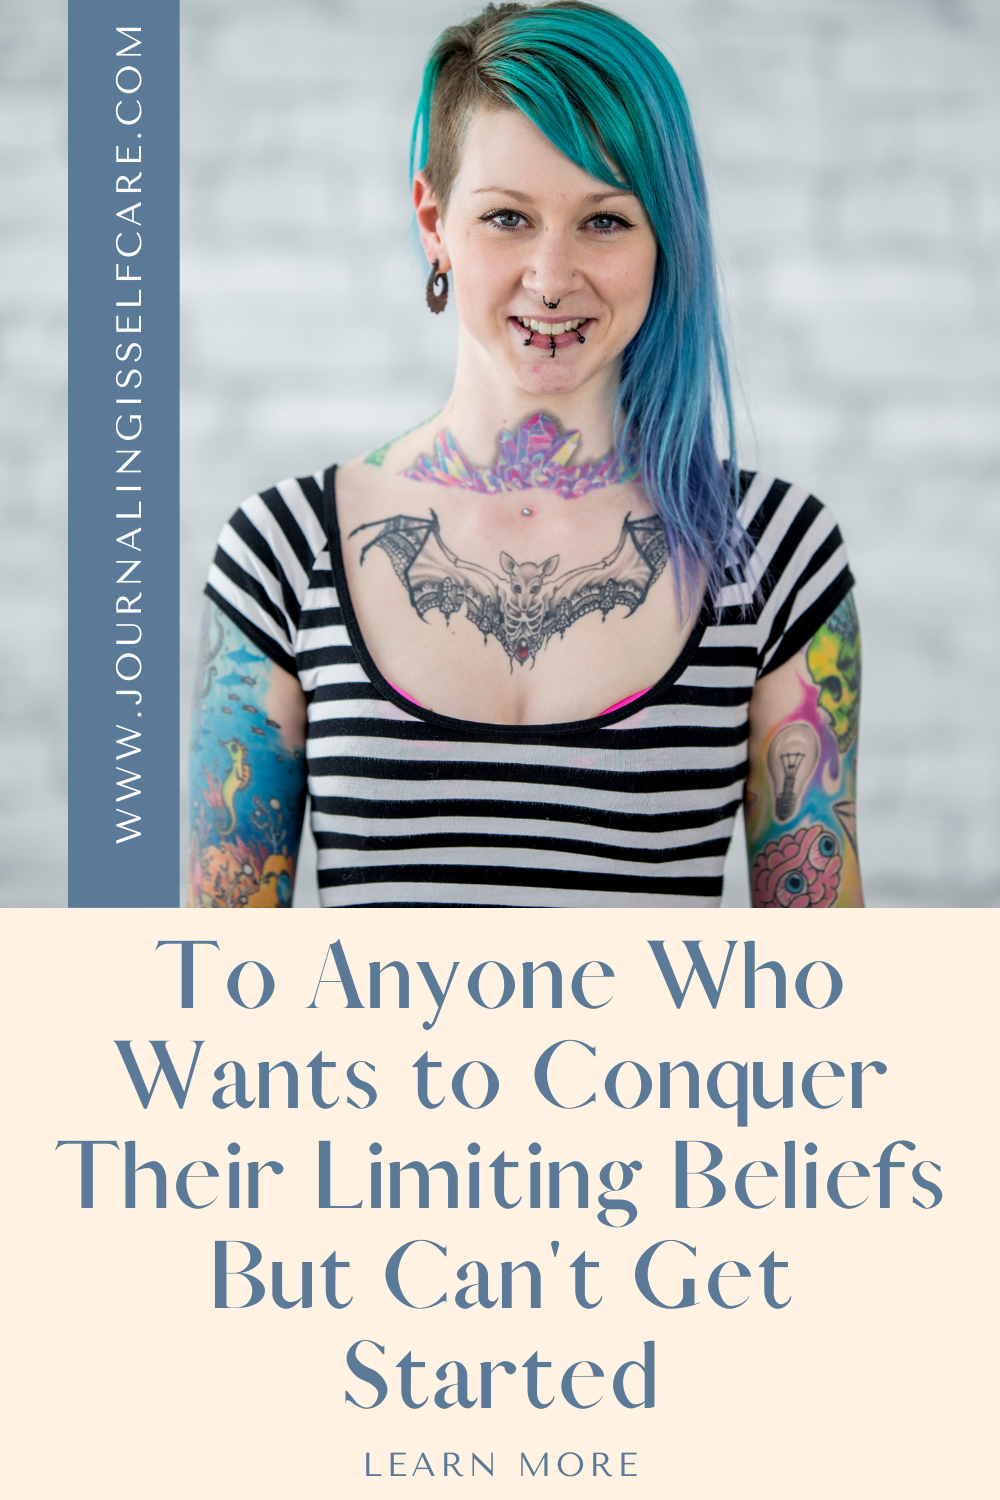 To Anyone Who Wants to Conquer Their Limiting Beliefs But Can't Get Started